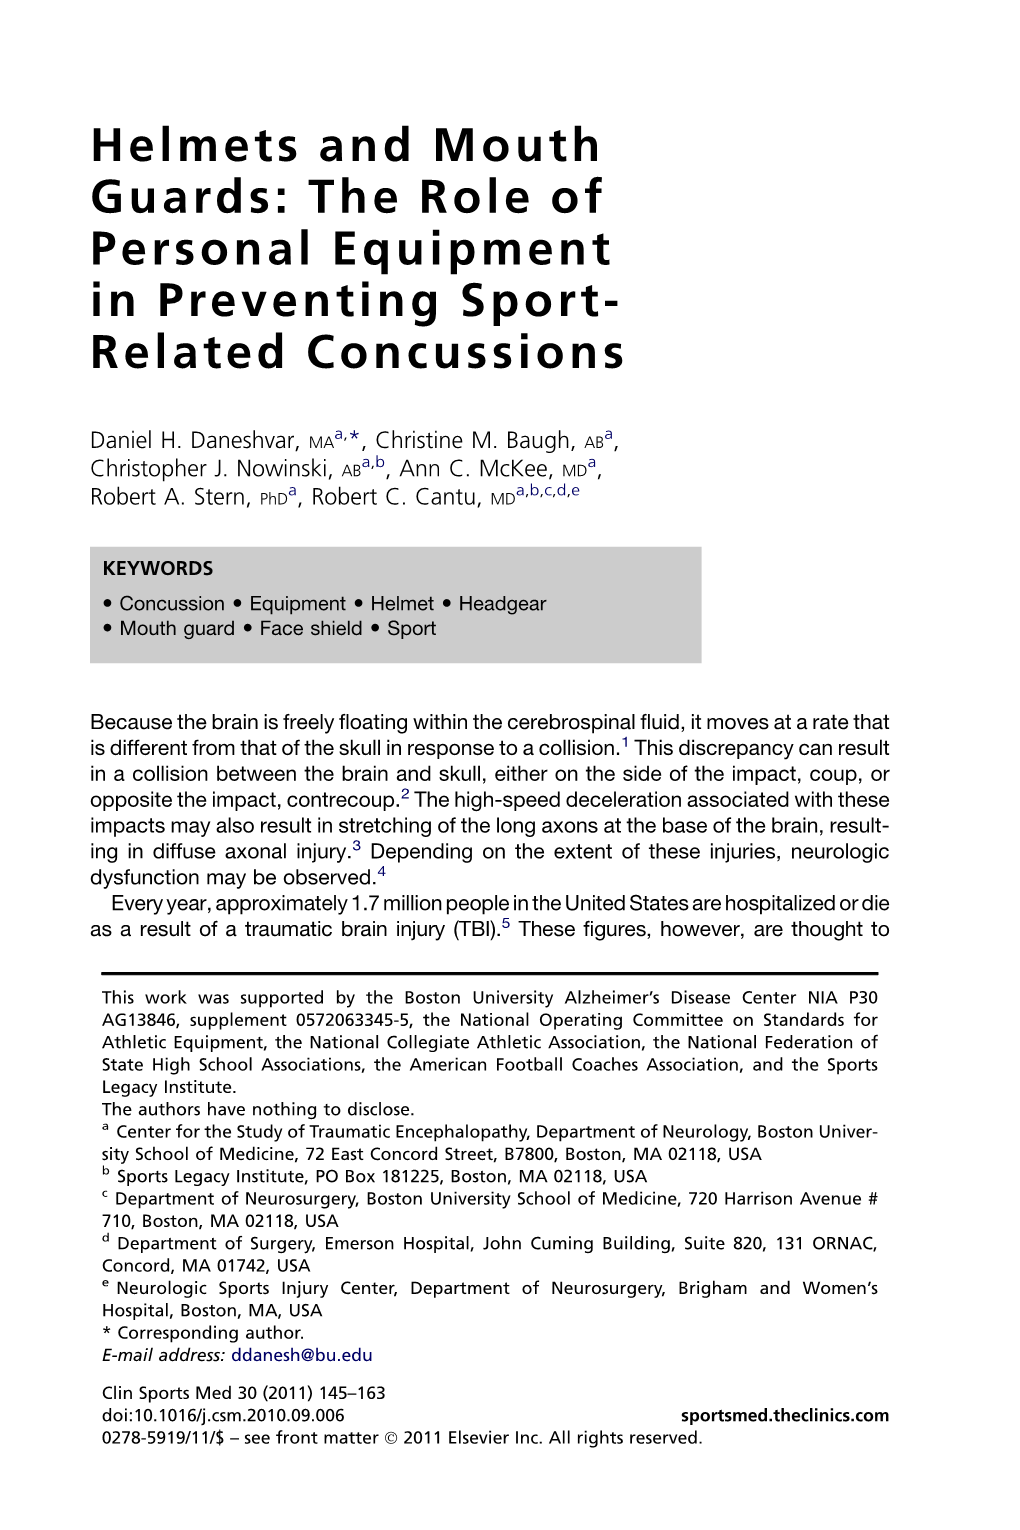 Helmets and Mouth Guards: the Role of Personal Equipment in Preventing Sport- Related Concussions